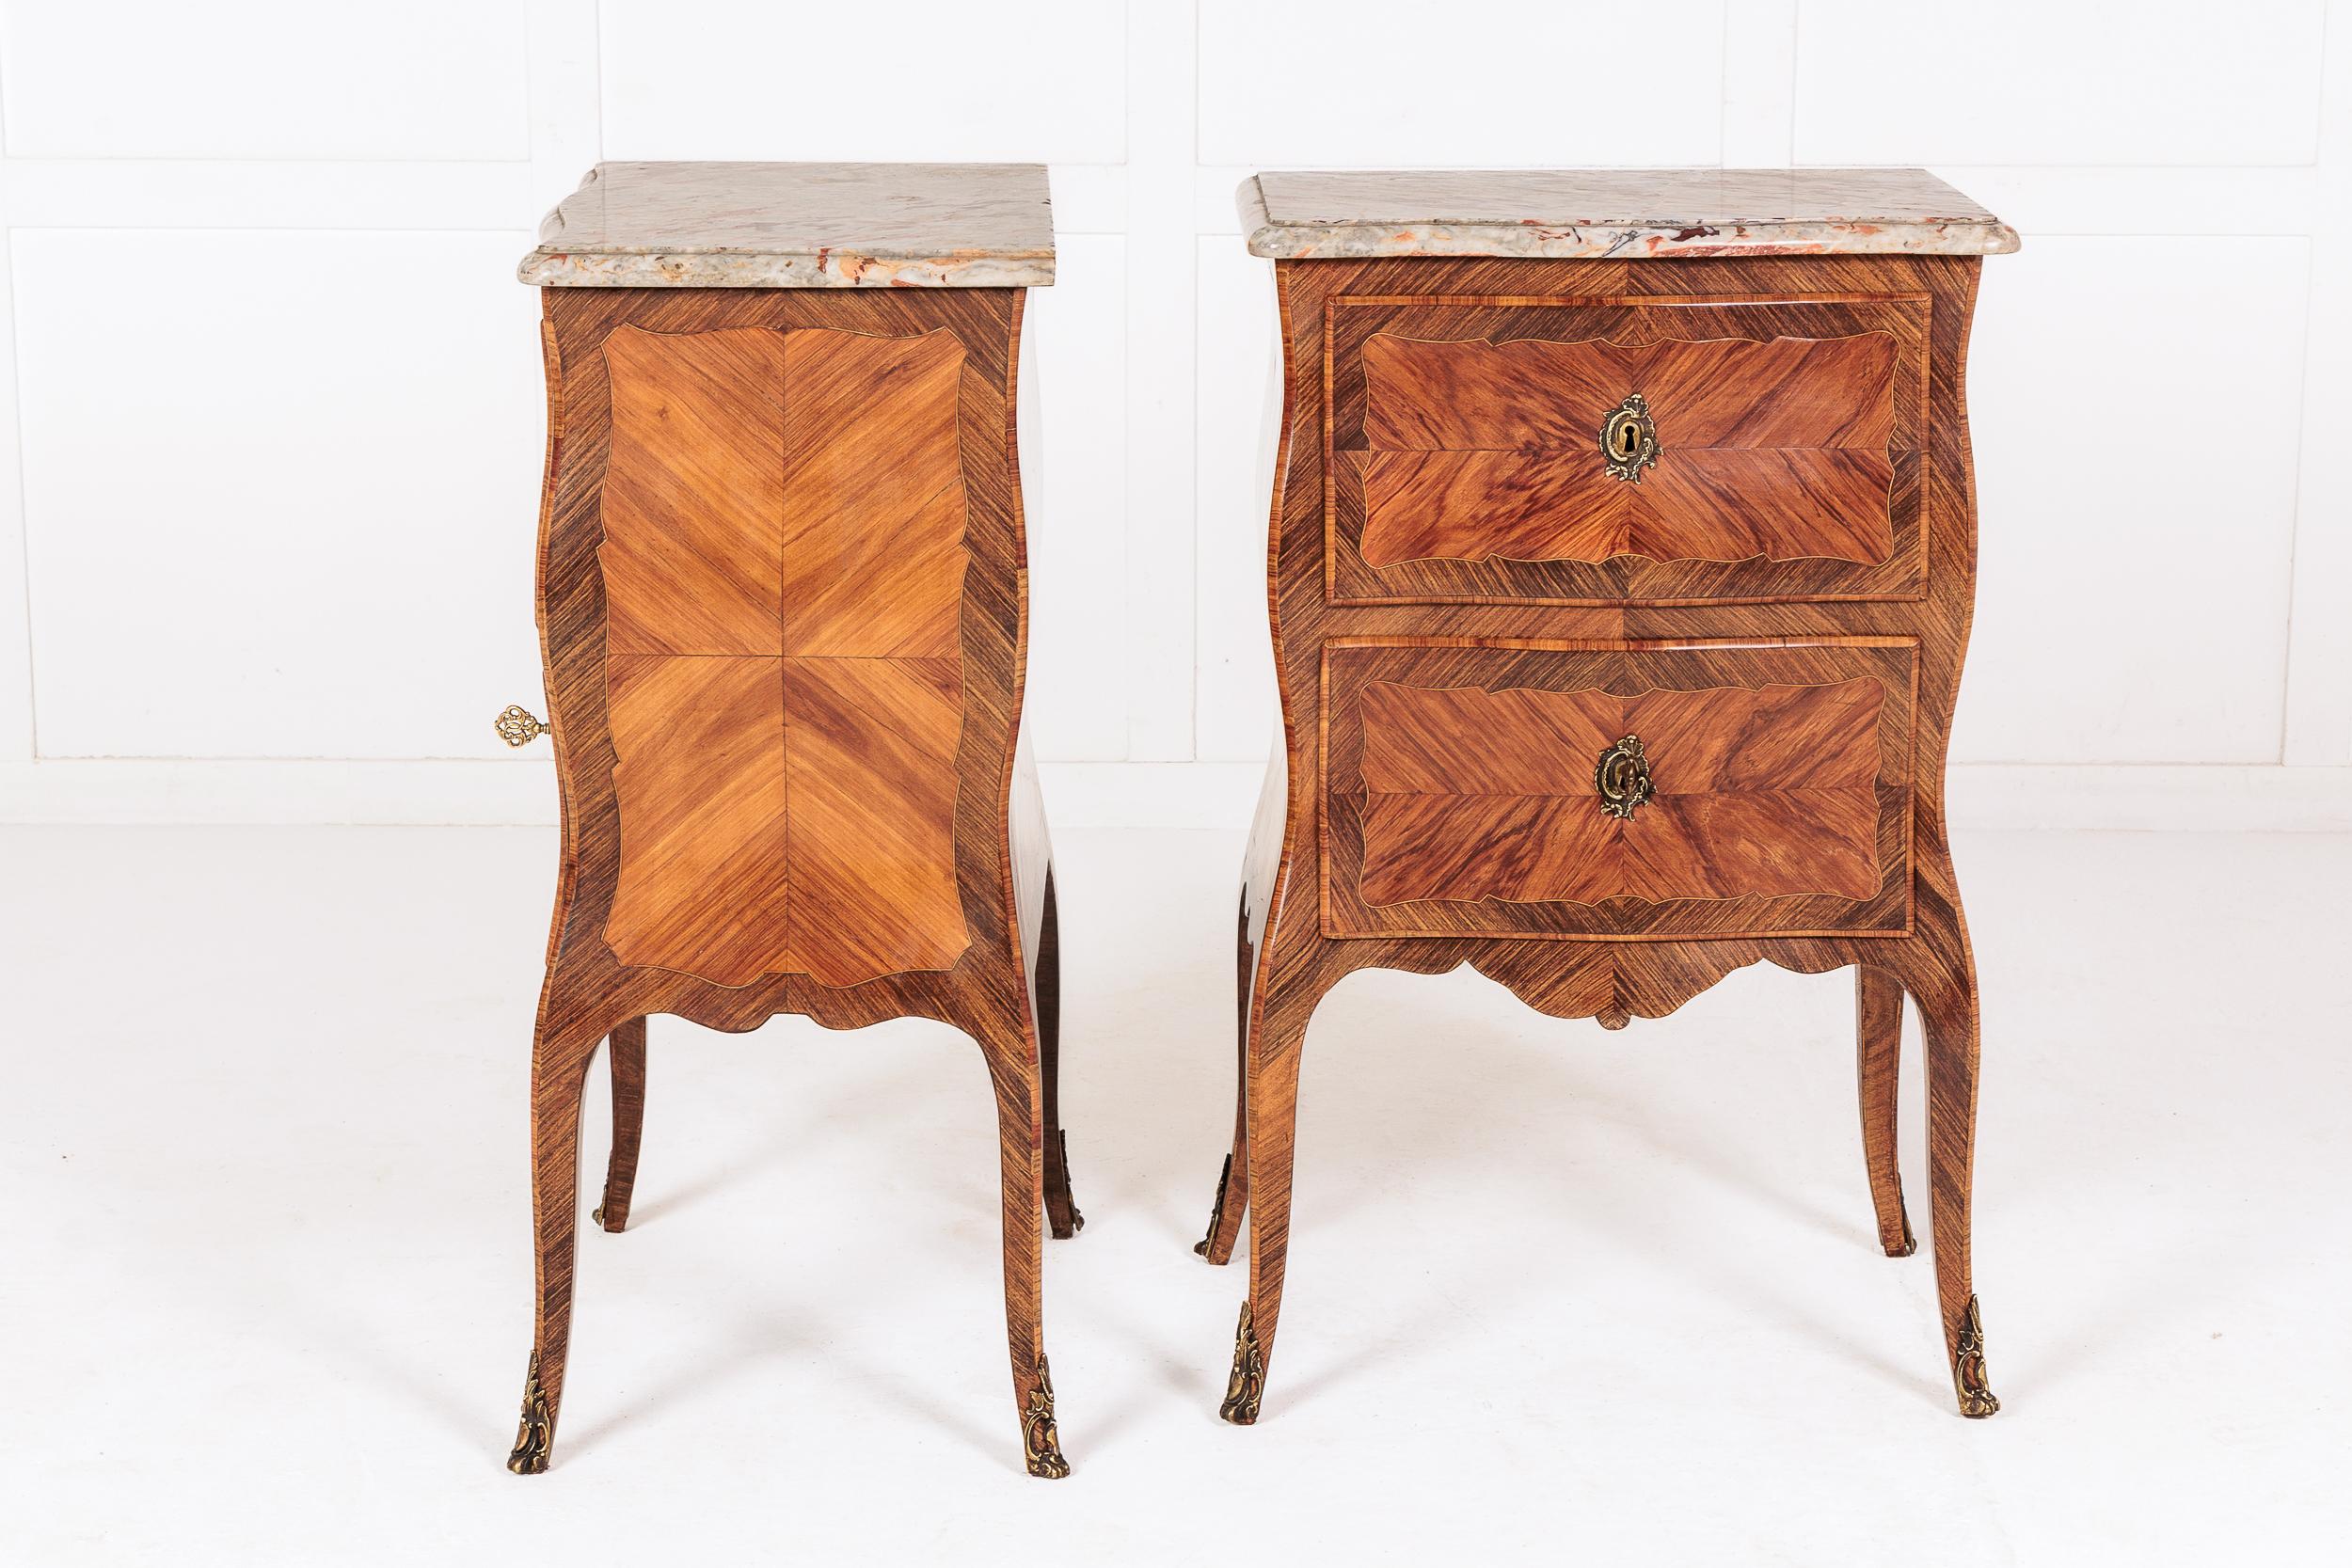 Pair of 19th Century Italian Bedside Cabinets with Marble Tops For Sale 2